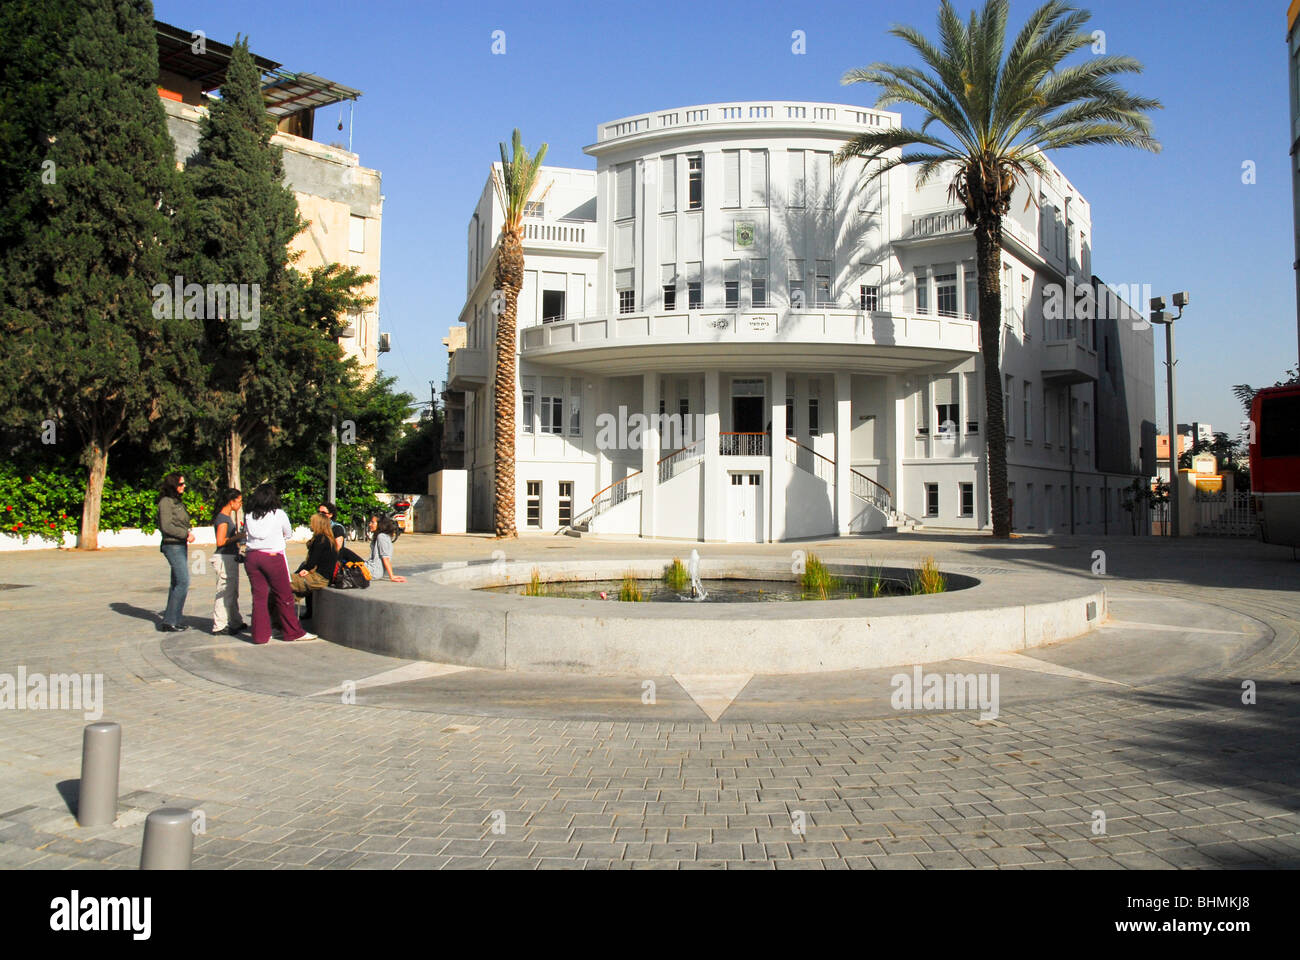 Tel Aviv Bialik House High Resolution Stock Photography and Images - Alamy